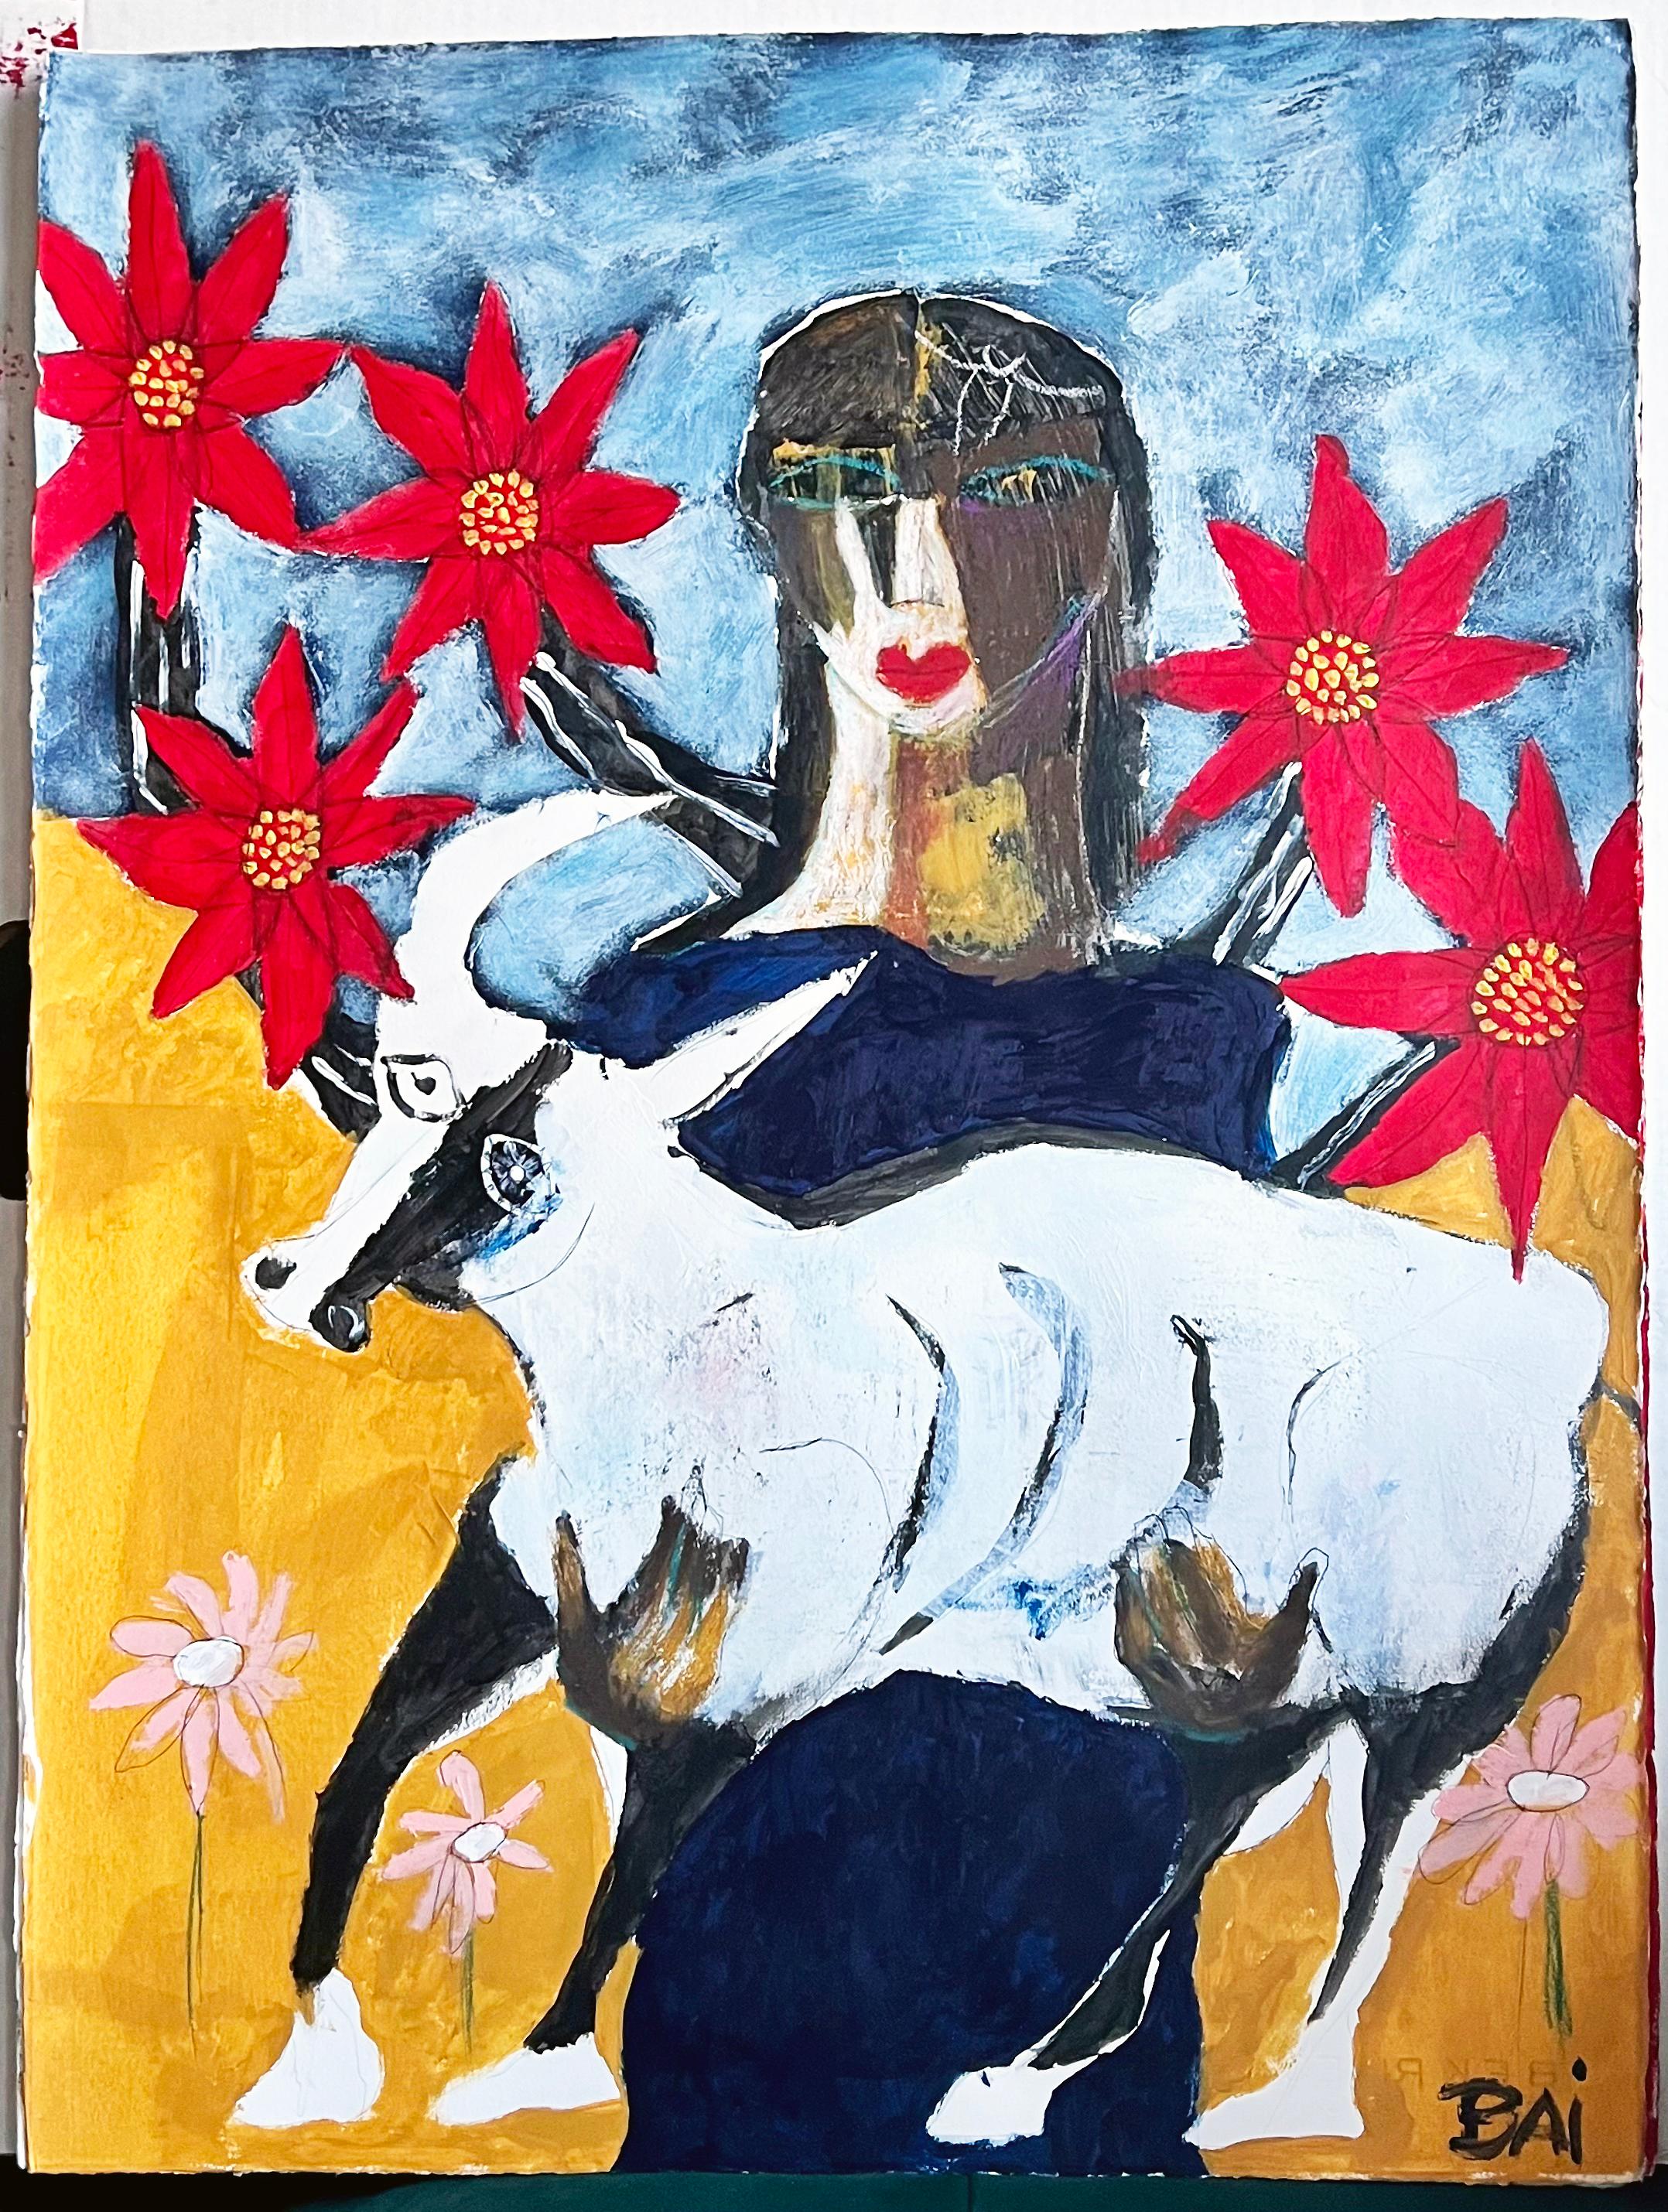 Woman with a Bull, 2023 by contemporary African American artist Bai (Carl Karni-Bain), is a 30 x 22in acrylic, oil pastel, and ballpoint pen figurative painting on etching paper.  The original work on paper (1/1) is signed by the artist on recto